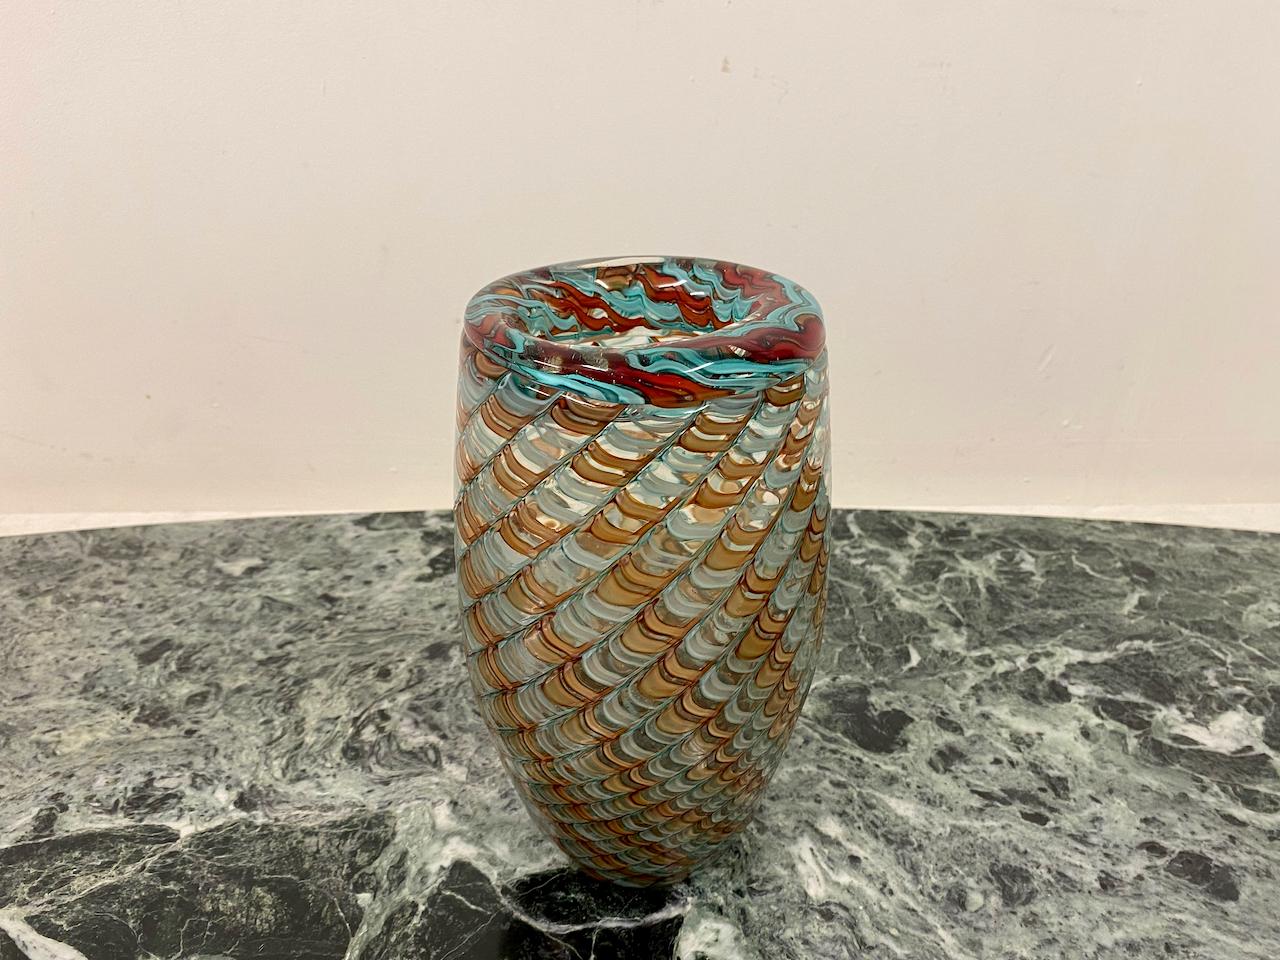 Murano Glass Vase by Stefano Toso In Good Condition For Sale In London, London